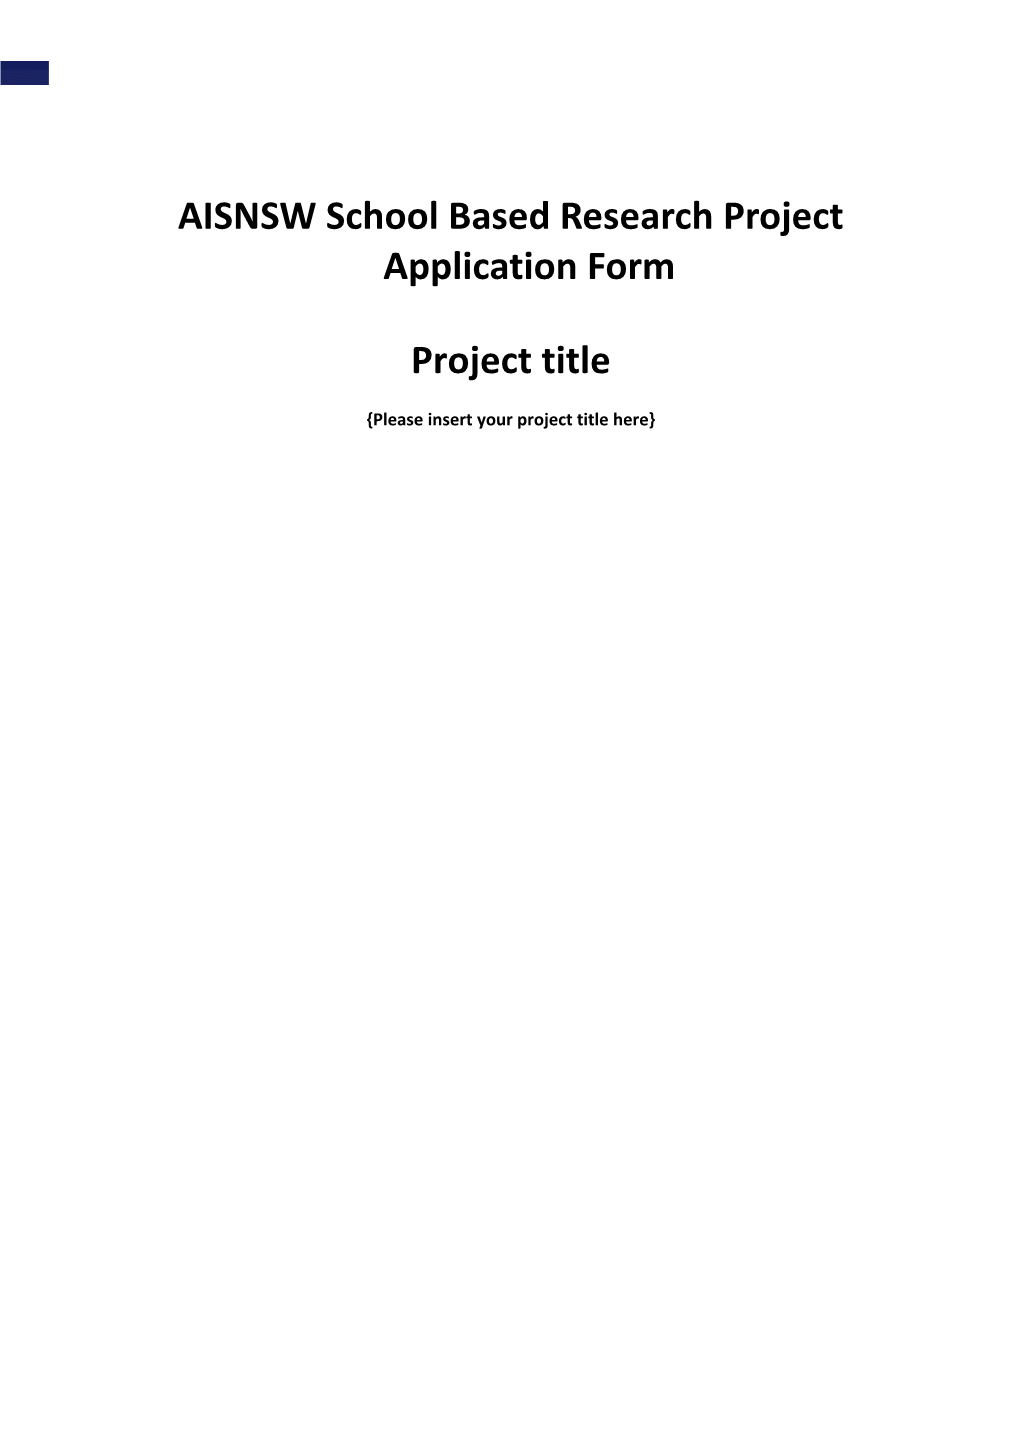 AIS School Based Research Project Application Template 2017